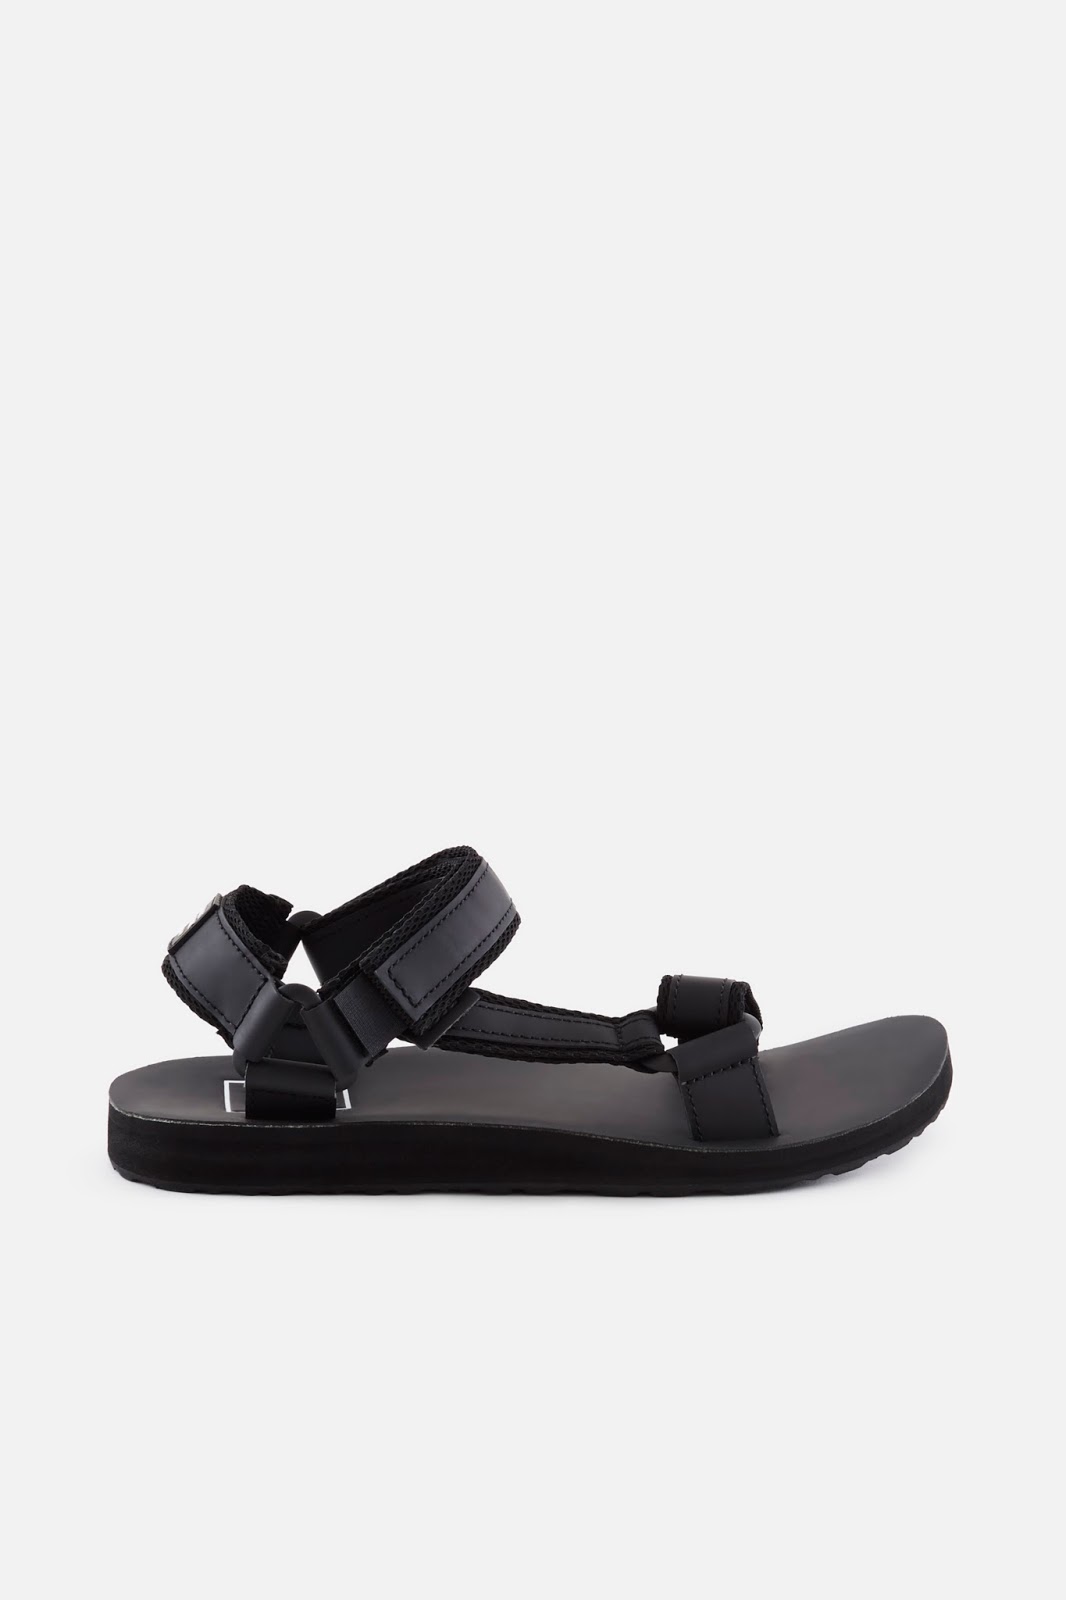 From Out of Town to Downtown: Teva X Opening Ceremony Universal Sandals ...